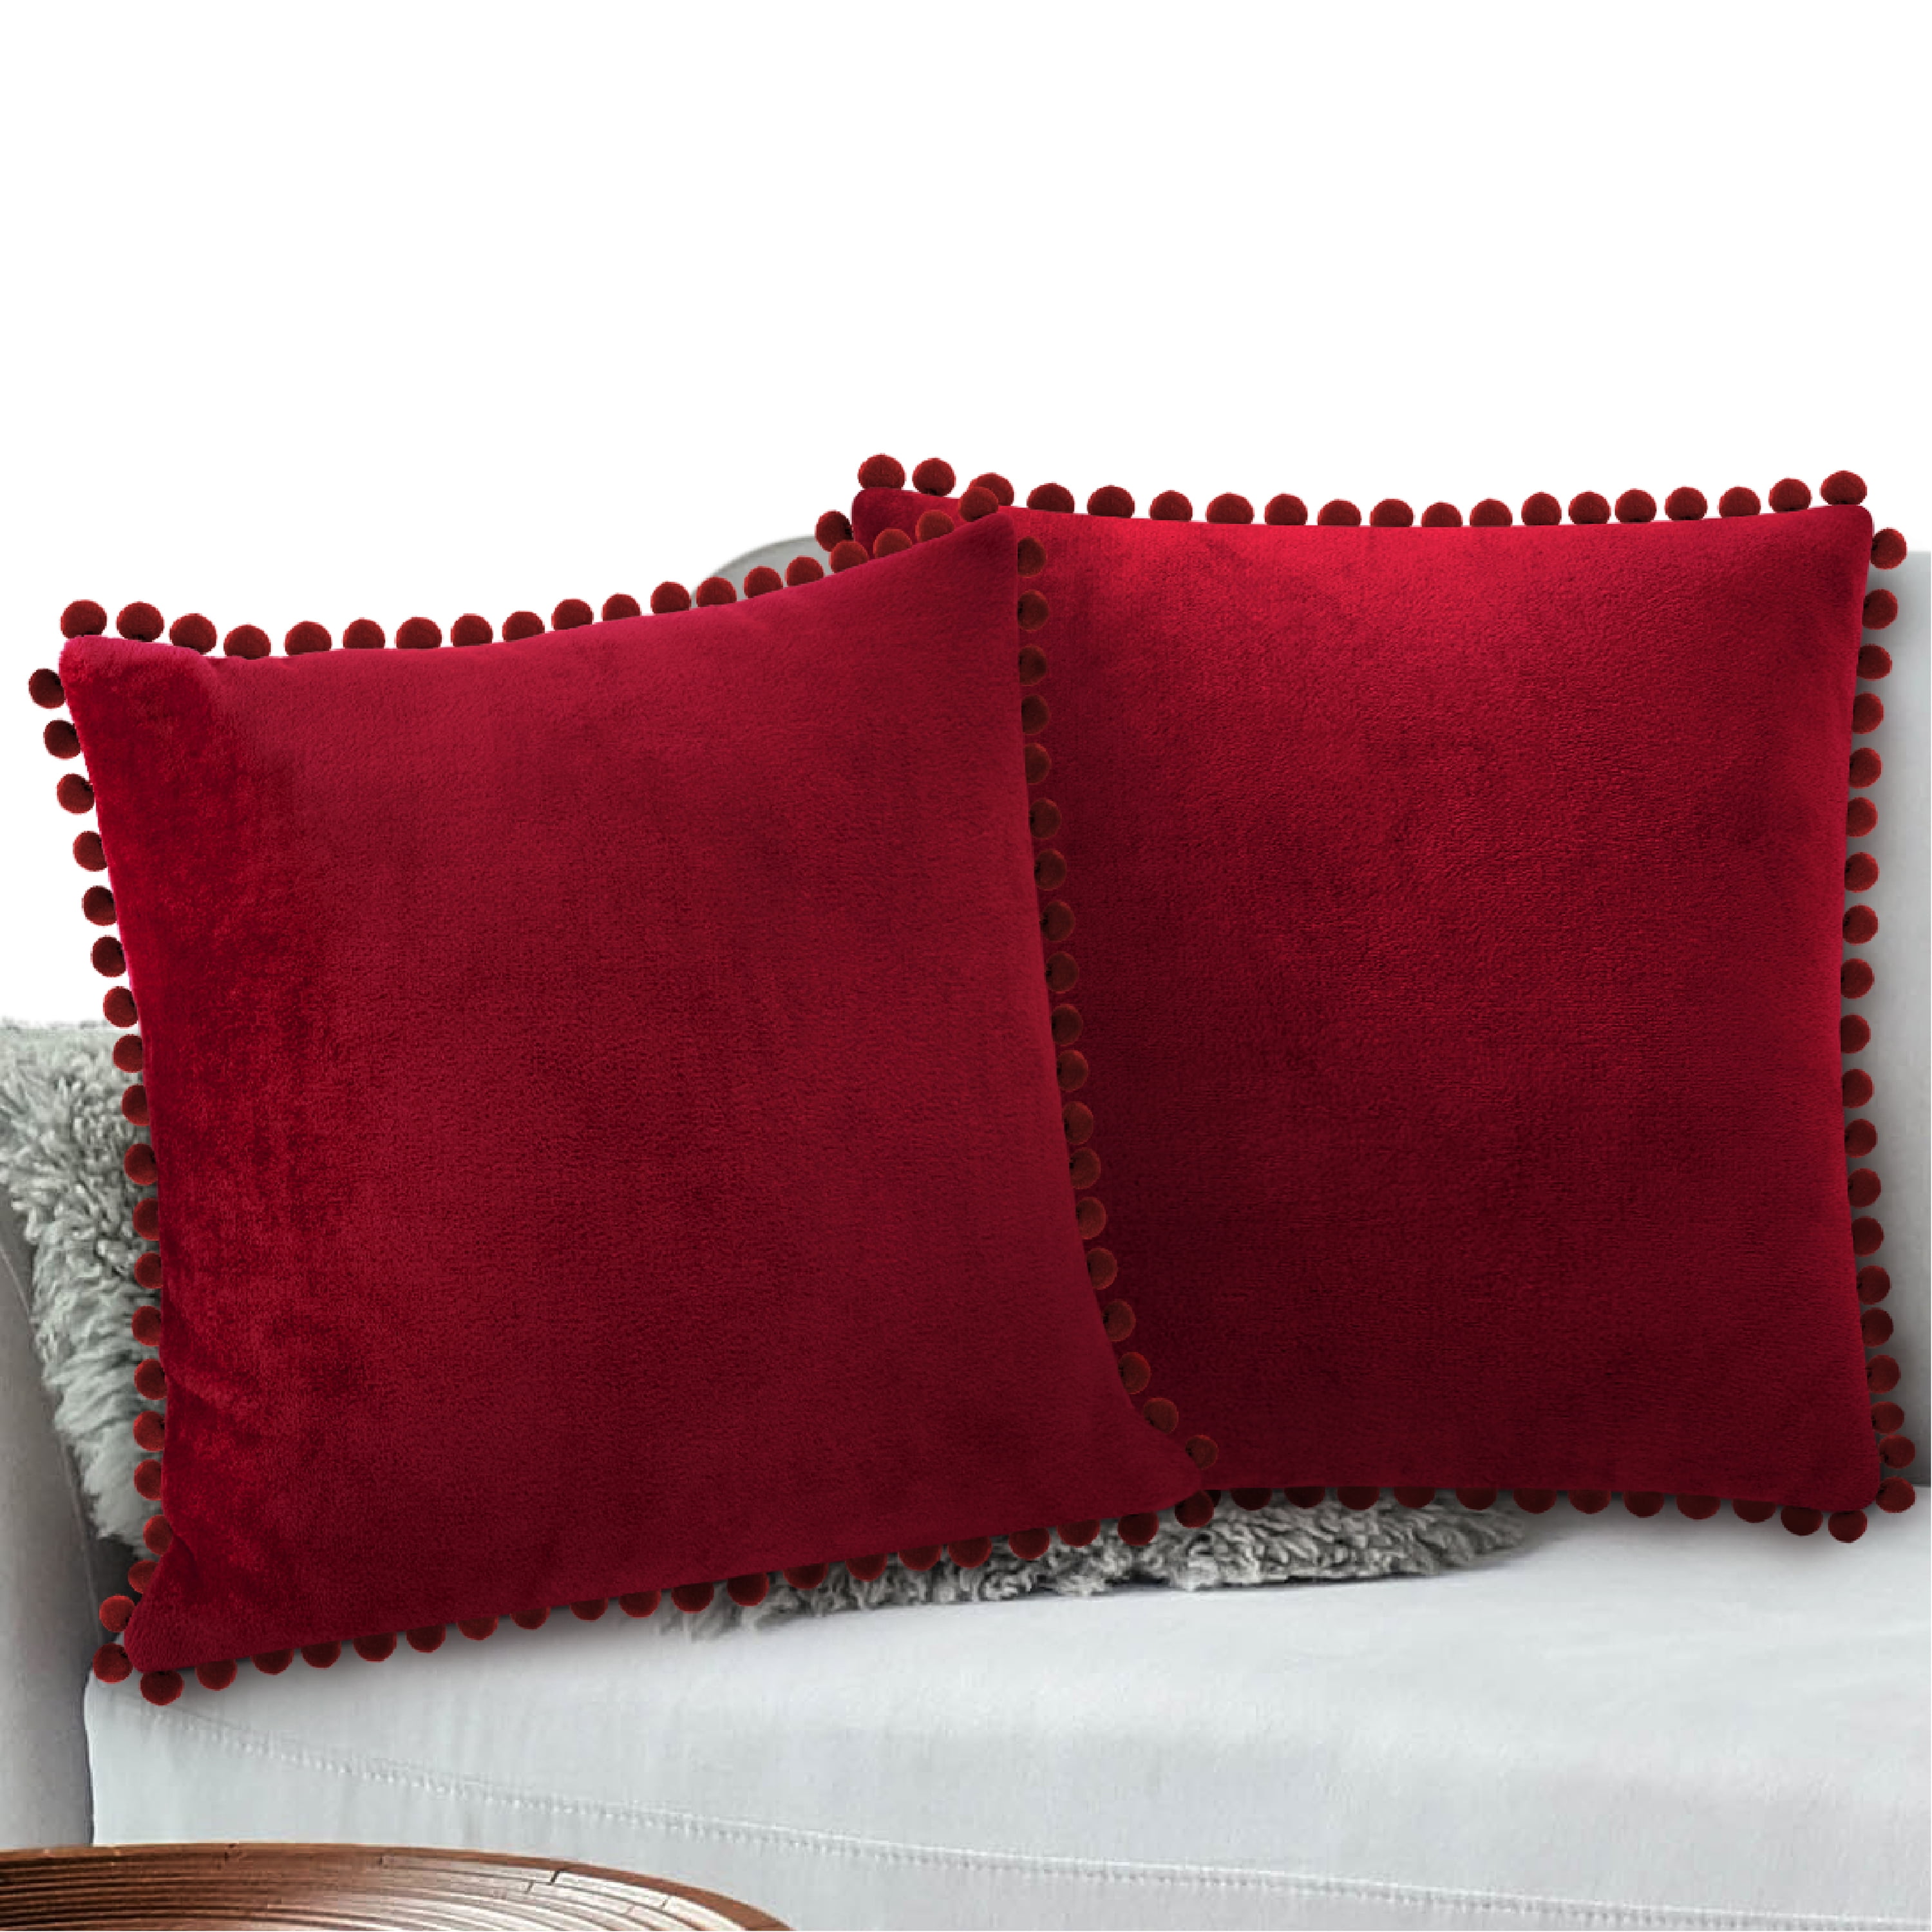 Cushion Covers for Sofa Couch Bed GIGIZAZA Decorative Throw Pillow Covers 18x18 White Gold Pom Pom Velvet Leaves Pillows Set of 2